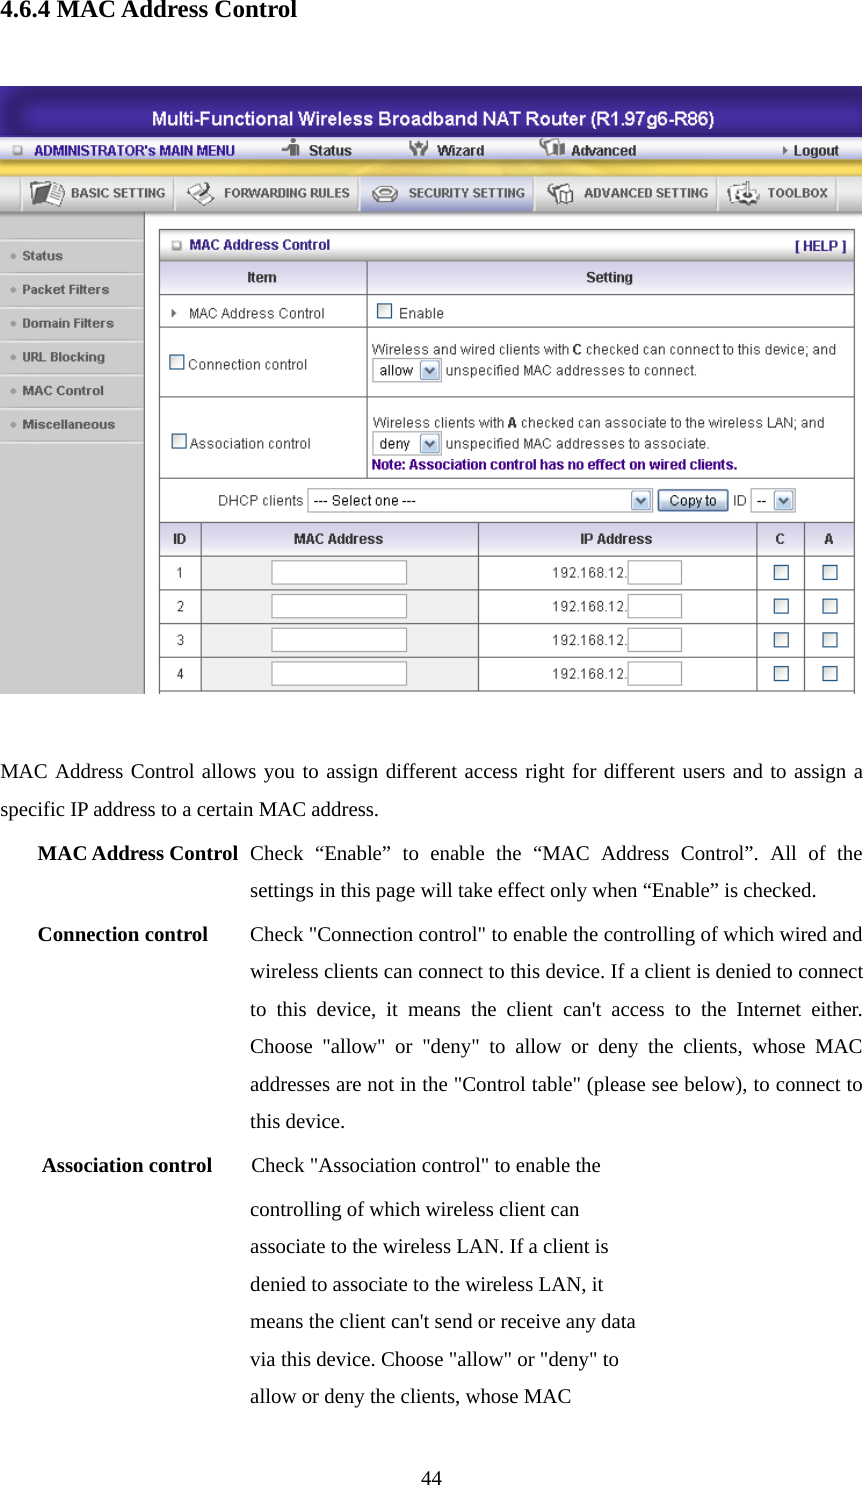 4.6.4 MAC Address Control    MAC Address Control allows you to assign different access right for different users and to assign a specific IP address to a certain MAC address. MAC Address Control Check “Enable” to enable the “MAC Address Control”. All of the settings in this page will take effect only when “Enable” is checked. Connection control  Check &quot;Connection control&quot; to enable the controlling of which wired and wireless clients can connect to this device. If a client is denied to connect to this device, it means the client can&apos;t access to the Internet either. Choose &quot;allow&quot; or &quot;deny&quot; to allow or deny the clients, whose MAC addresses are not in the &quot;Control table&quot; (please see below), to connect to this device. Association control  Check &quot;Association control&quot; to enable the controlling of which wireless client can associate to the wireless LAN. If a client is denied to associate to the wireless LAN, it means the client can&apos;t send or receive any data via this device. Choose &quot;allow&quot; or &quot;deny&quot; to allow or deny the clients, whose MAC  44